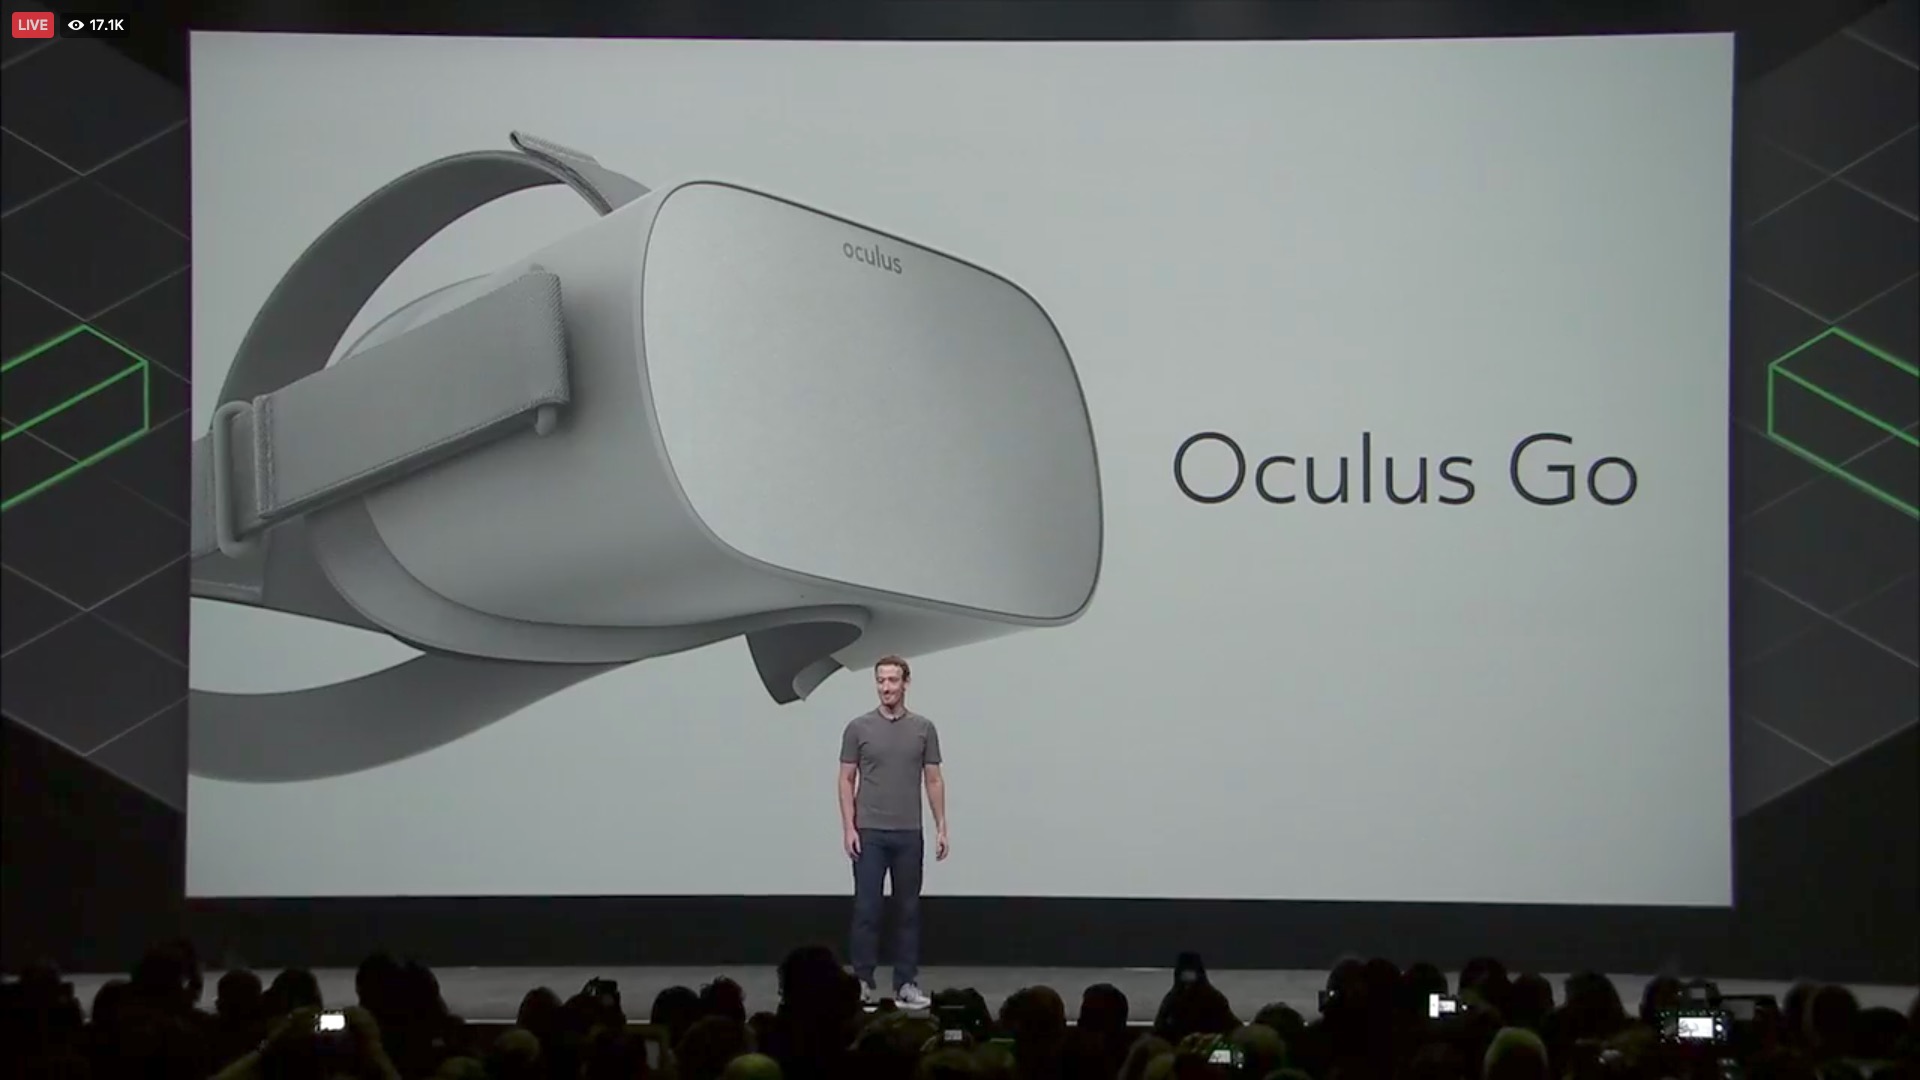 Oculus Go is Facebook’s first fully wireless, standalone headset